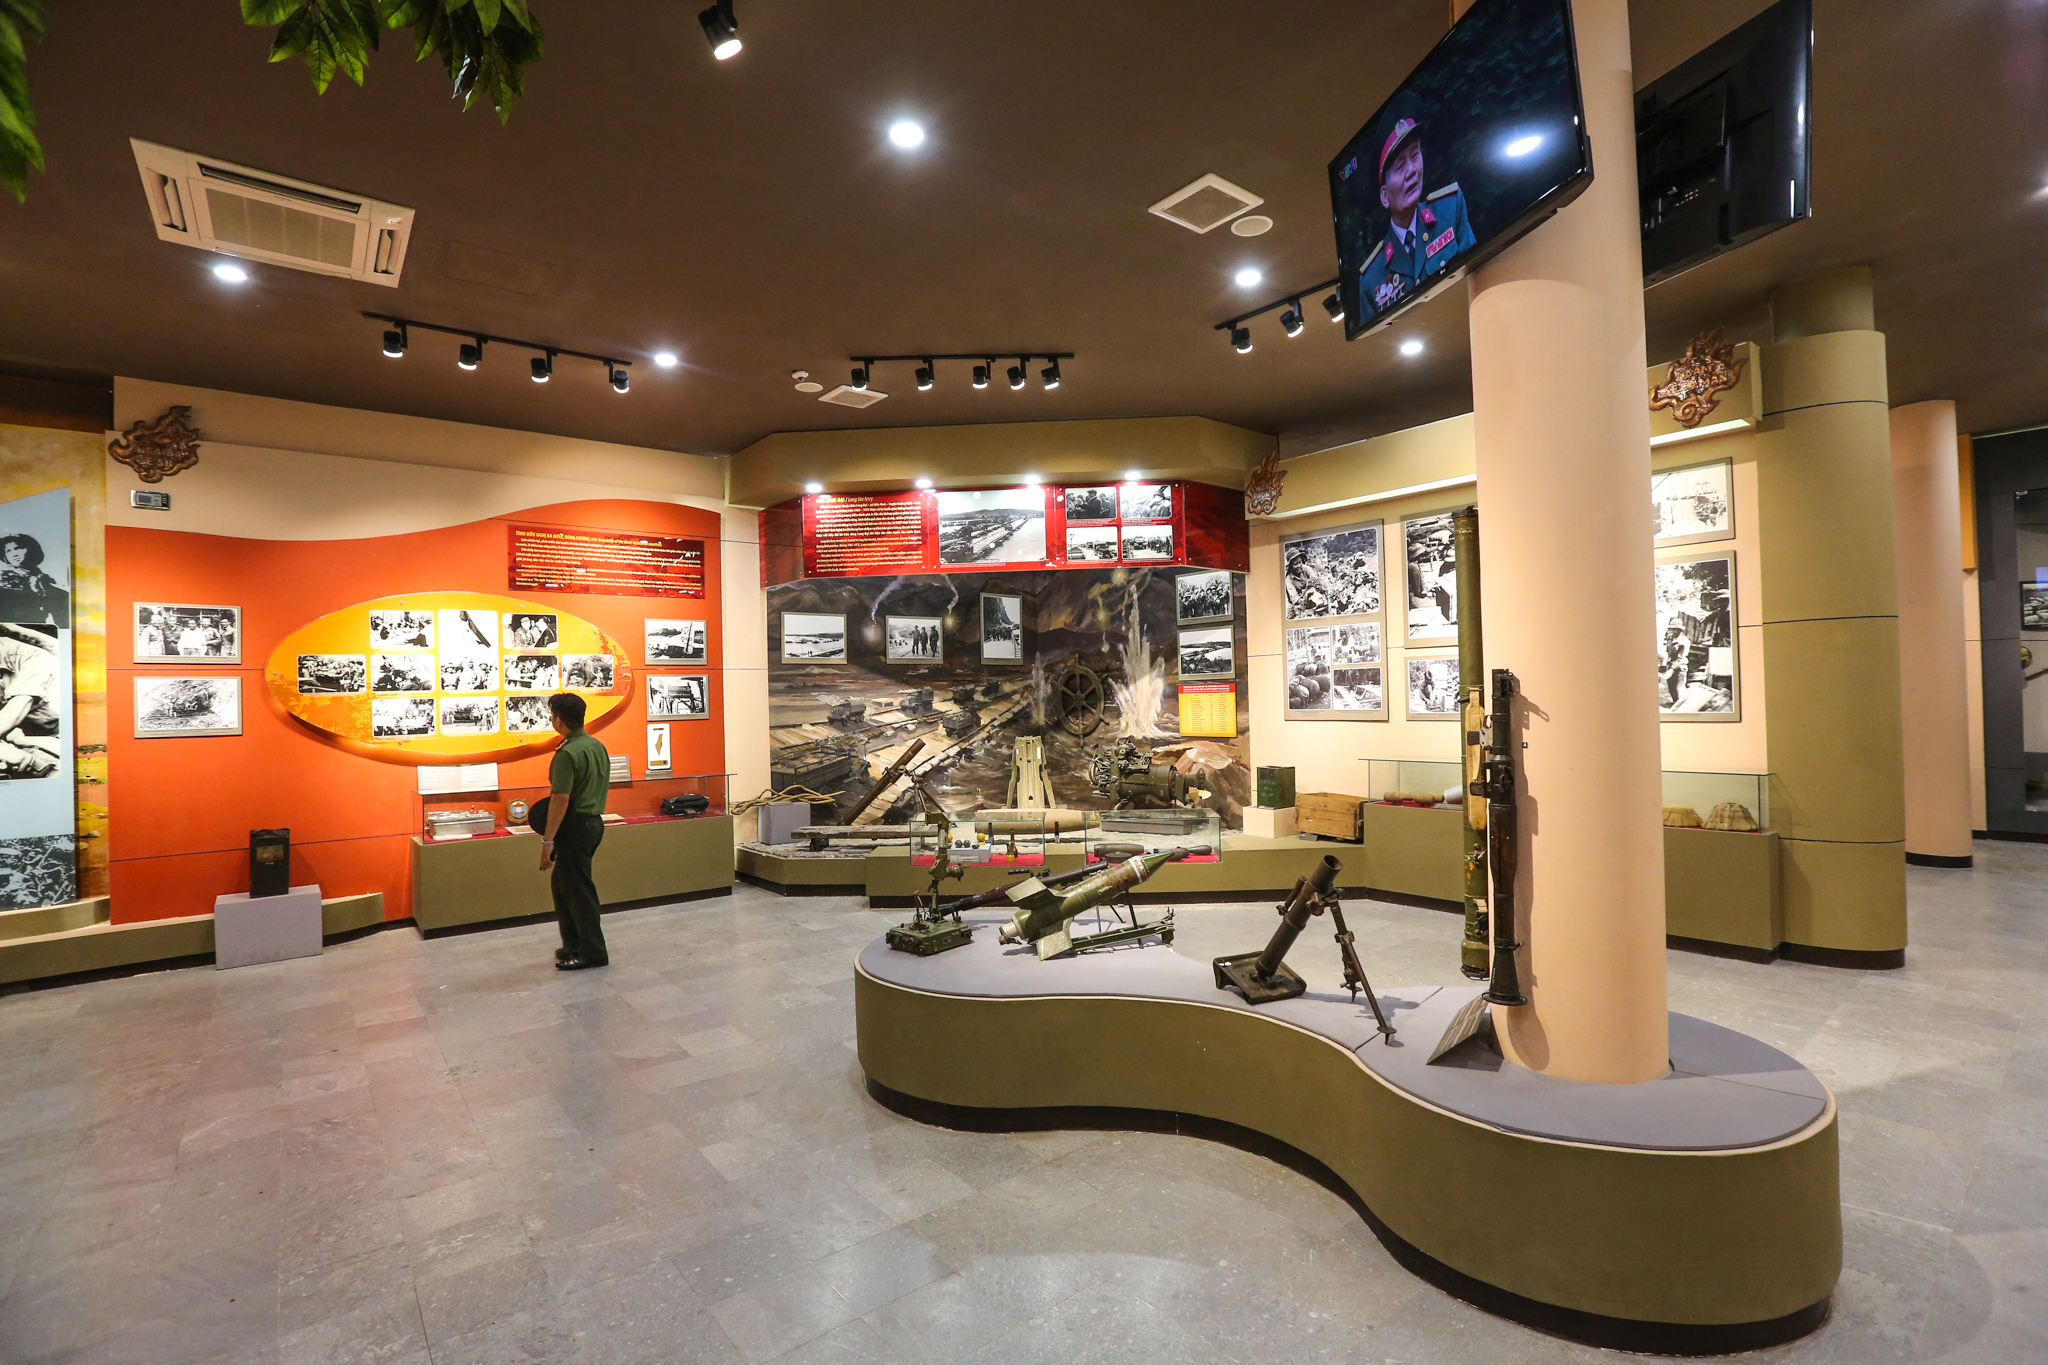 The museum shows the mature and strength of Truong Son soldiers who contributed to the victory in Spring1975, ending the war and liberating the nation.